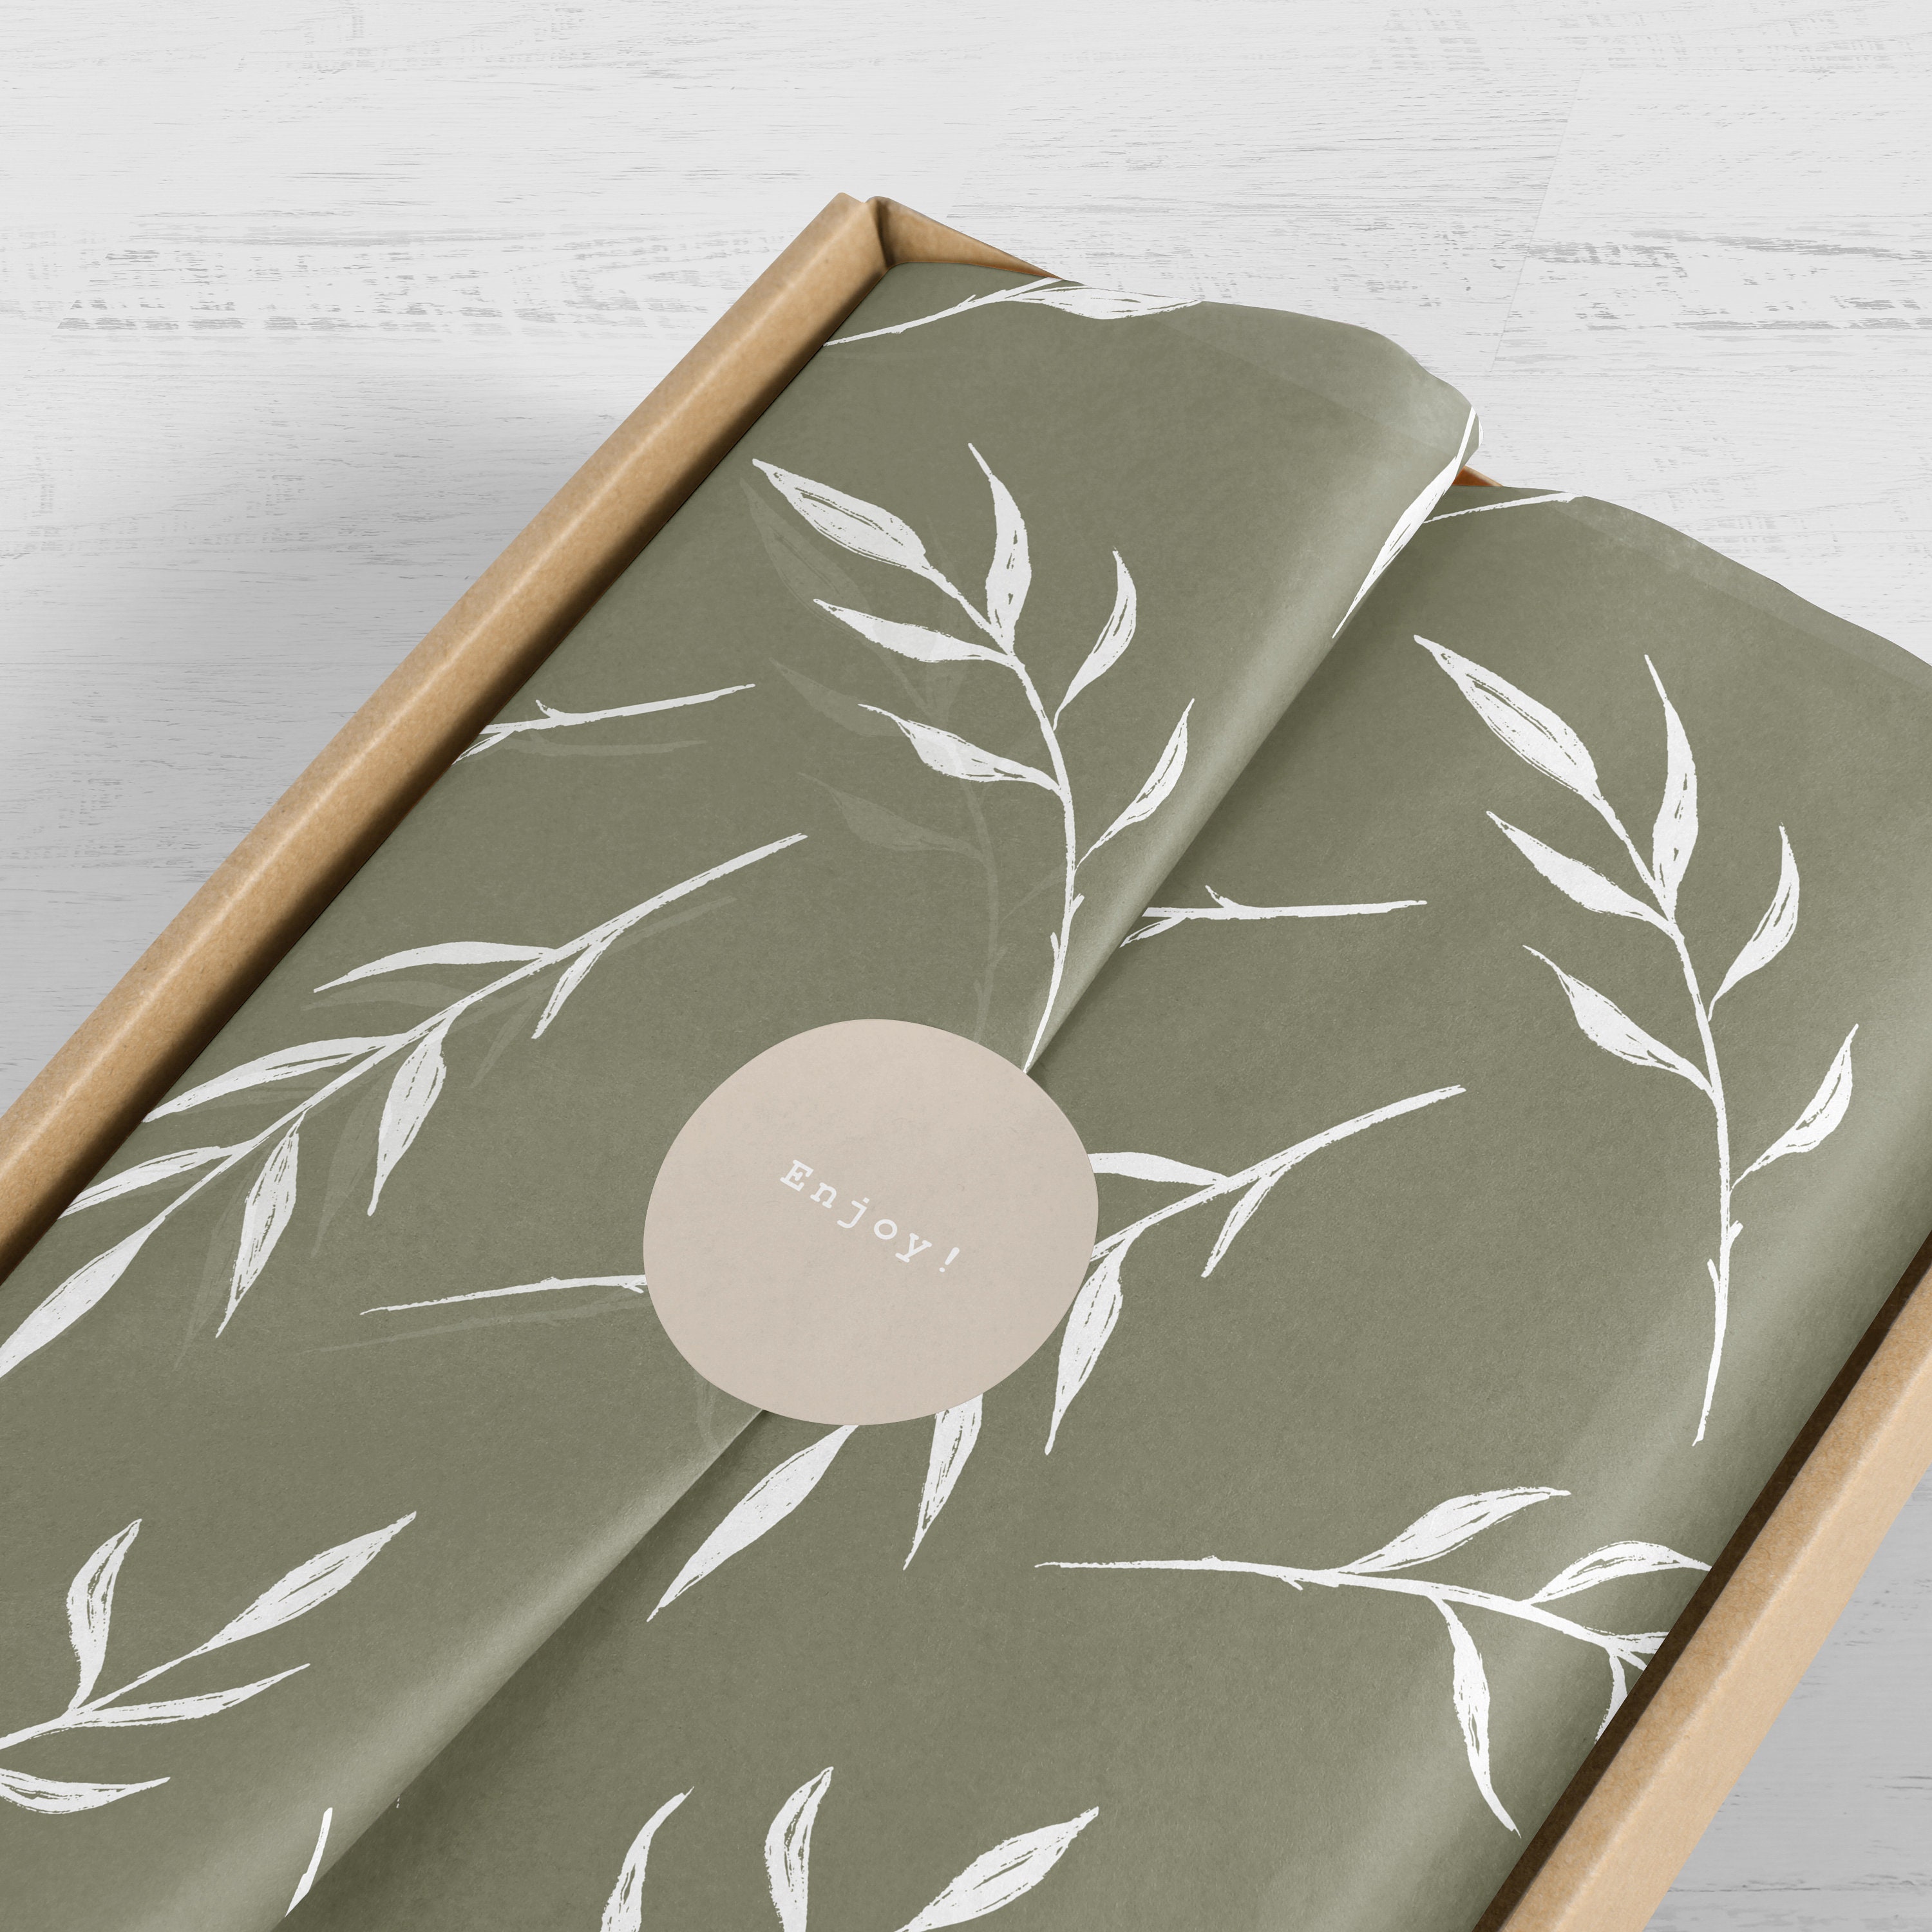 Leaf Designed Tissue Wrapping Paper / Gift Wrapping Tissue Paper